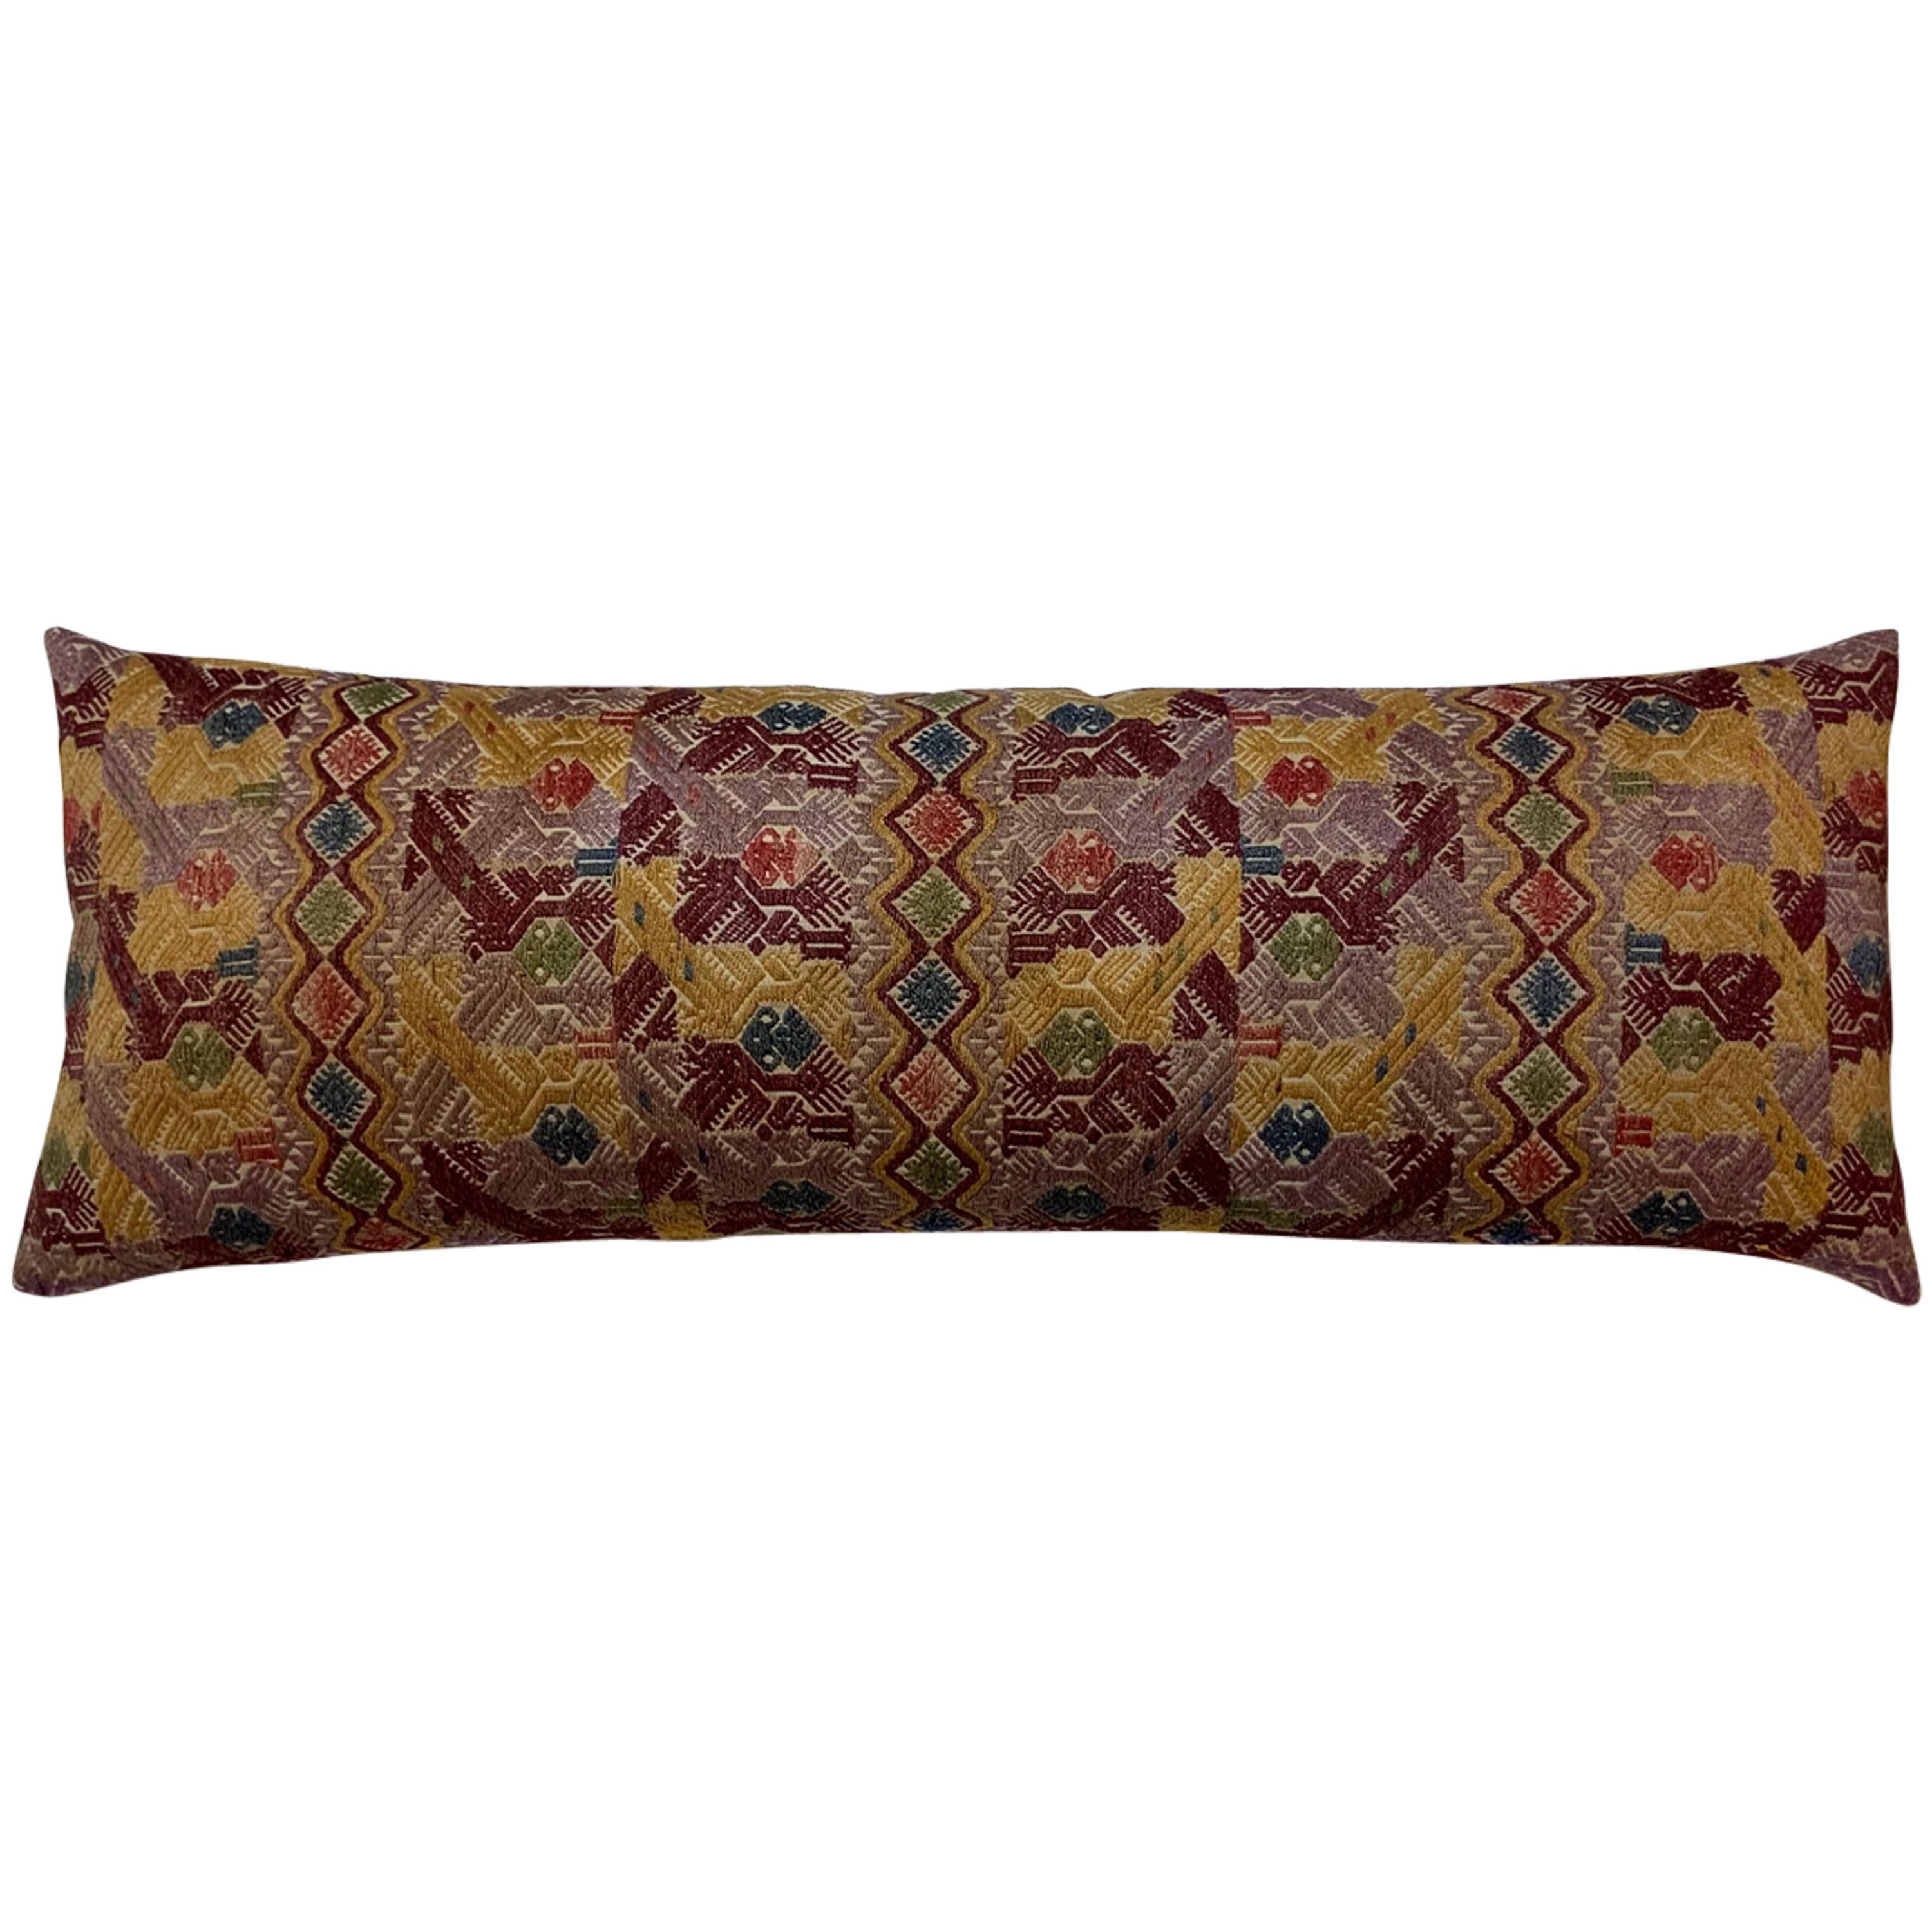 Vintage Hand Embroidered Suzani Pillow